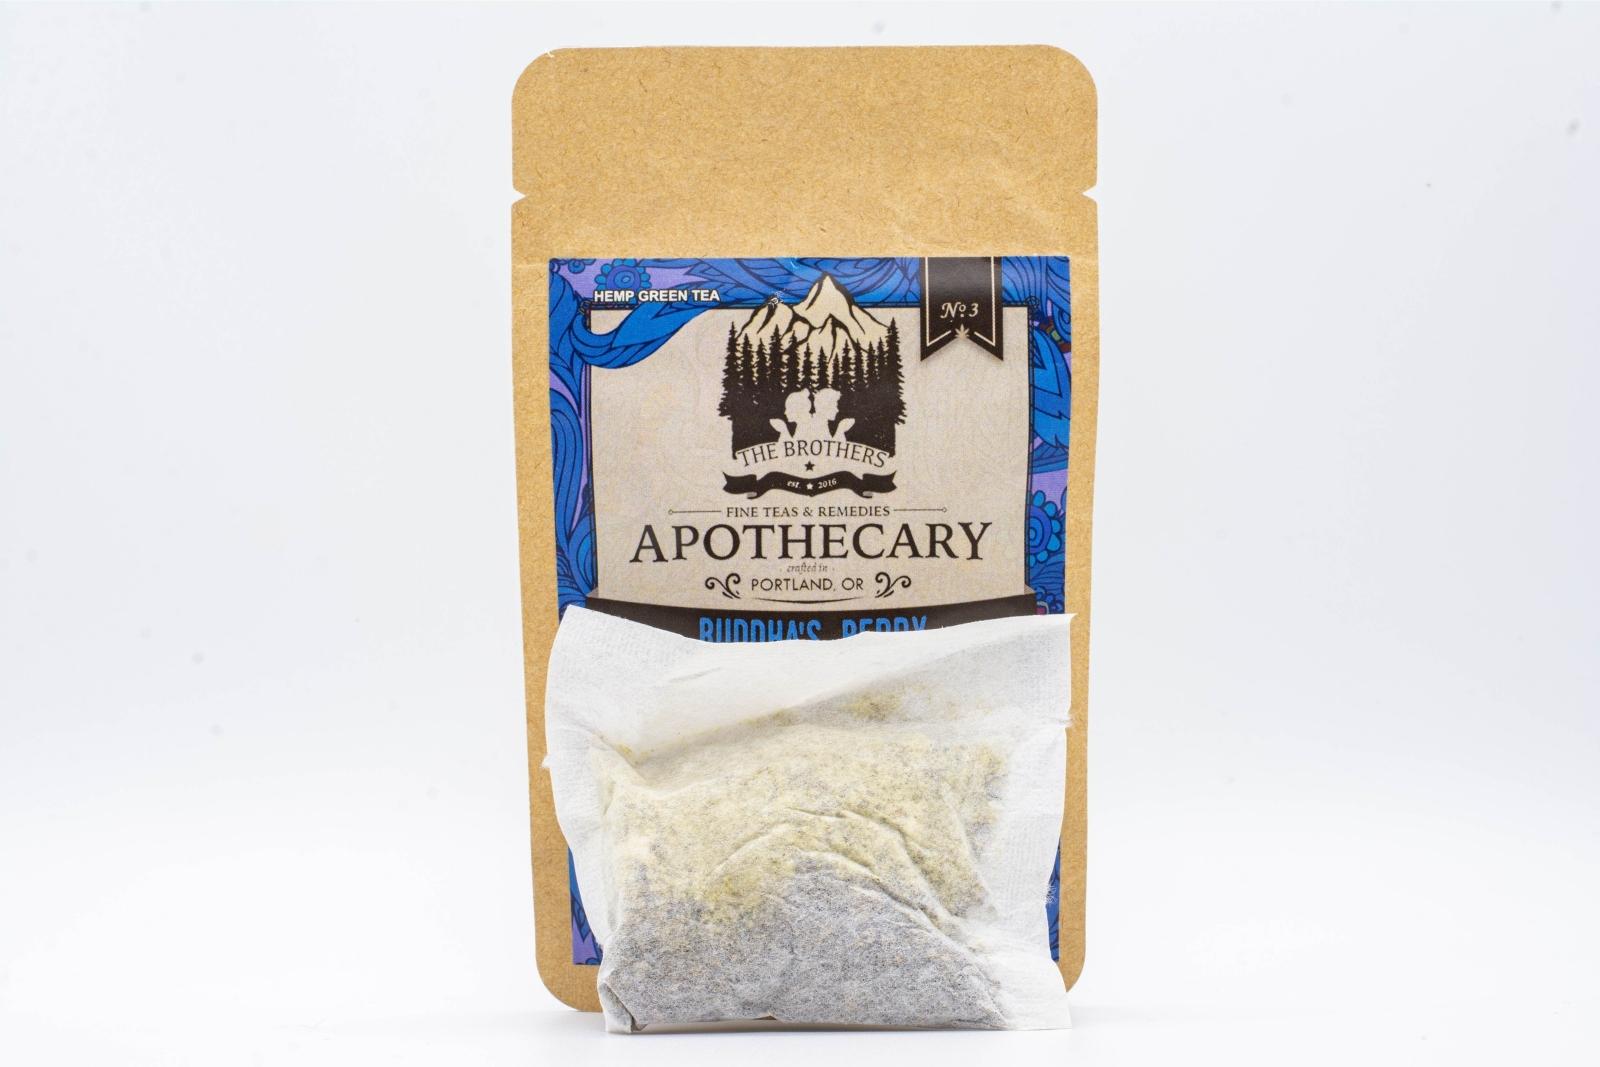 A tea bag in front of a small packet of The Brothers Apothecary's Buddha's Berry Tea on a white background